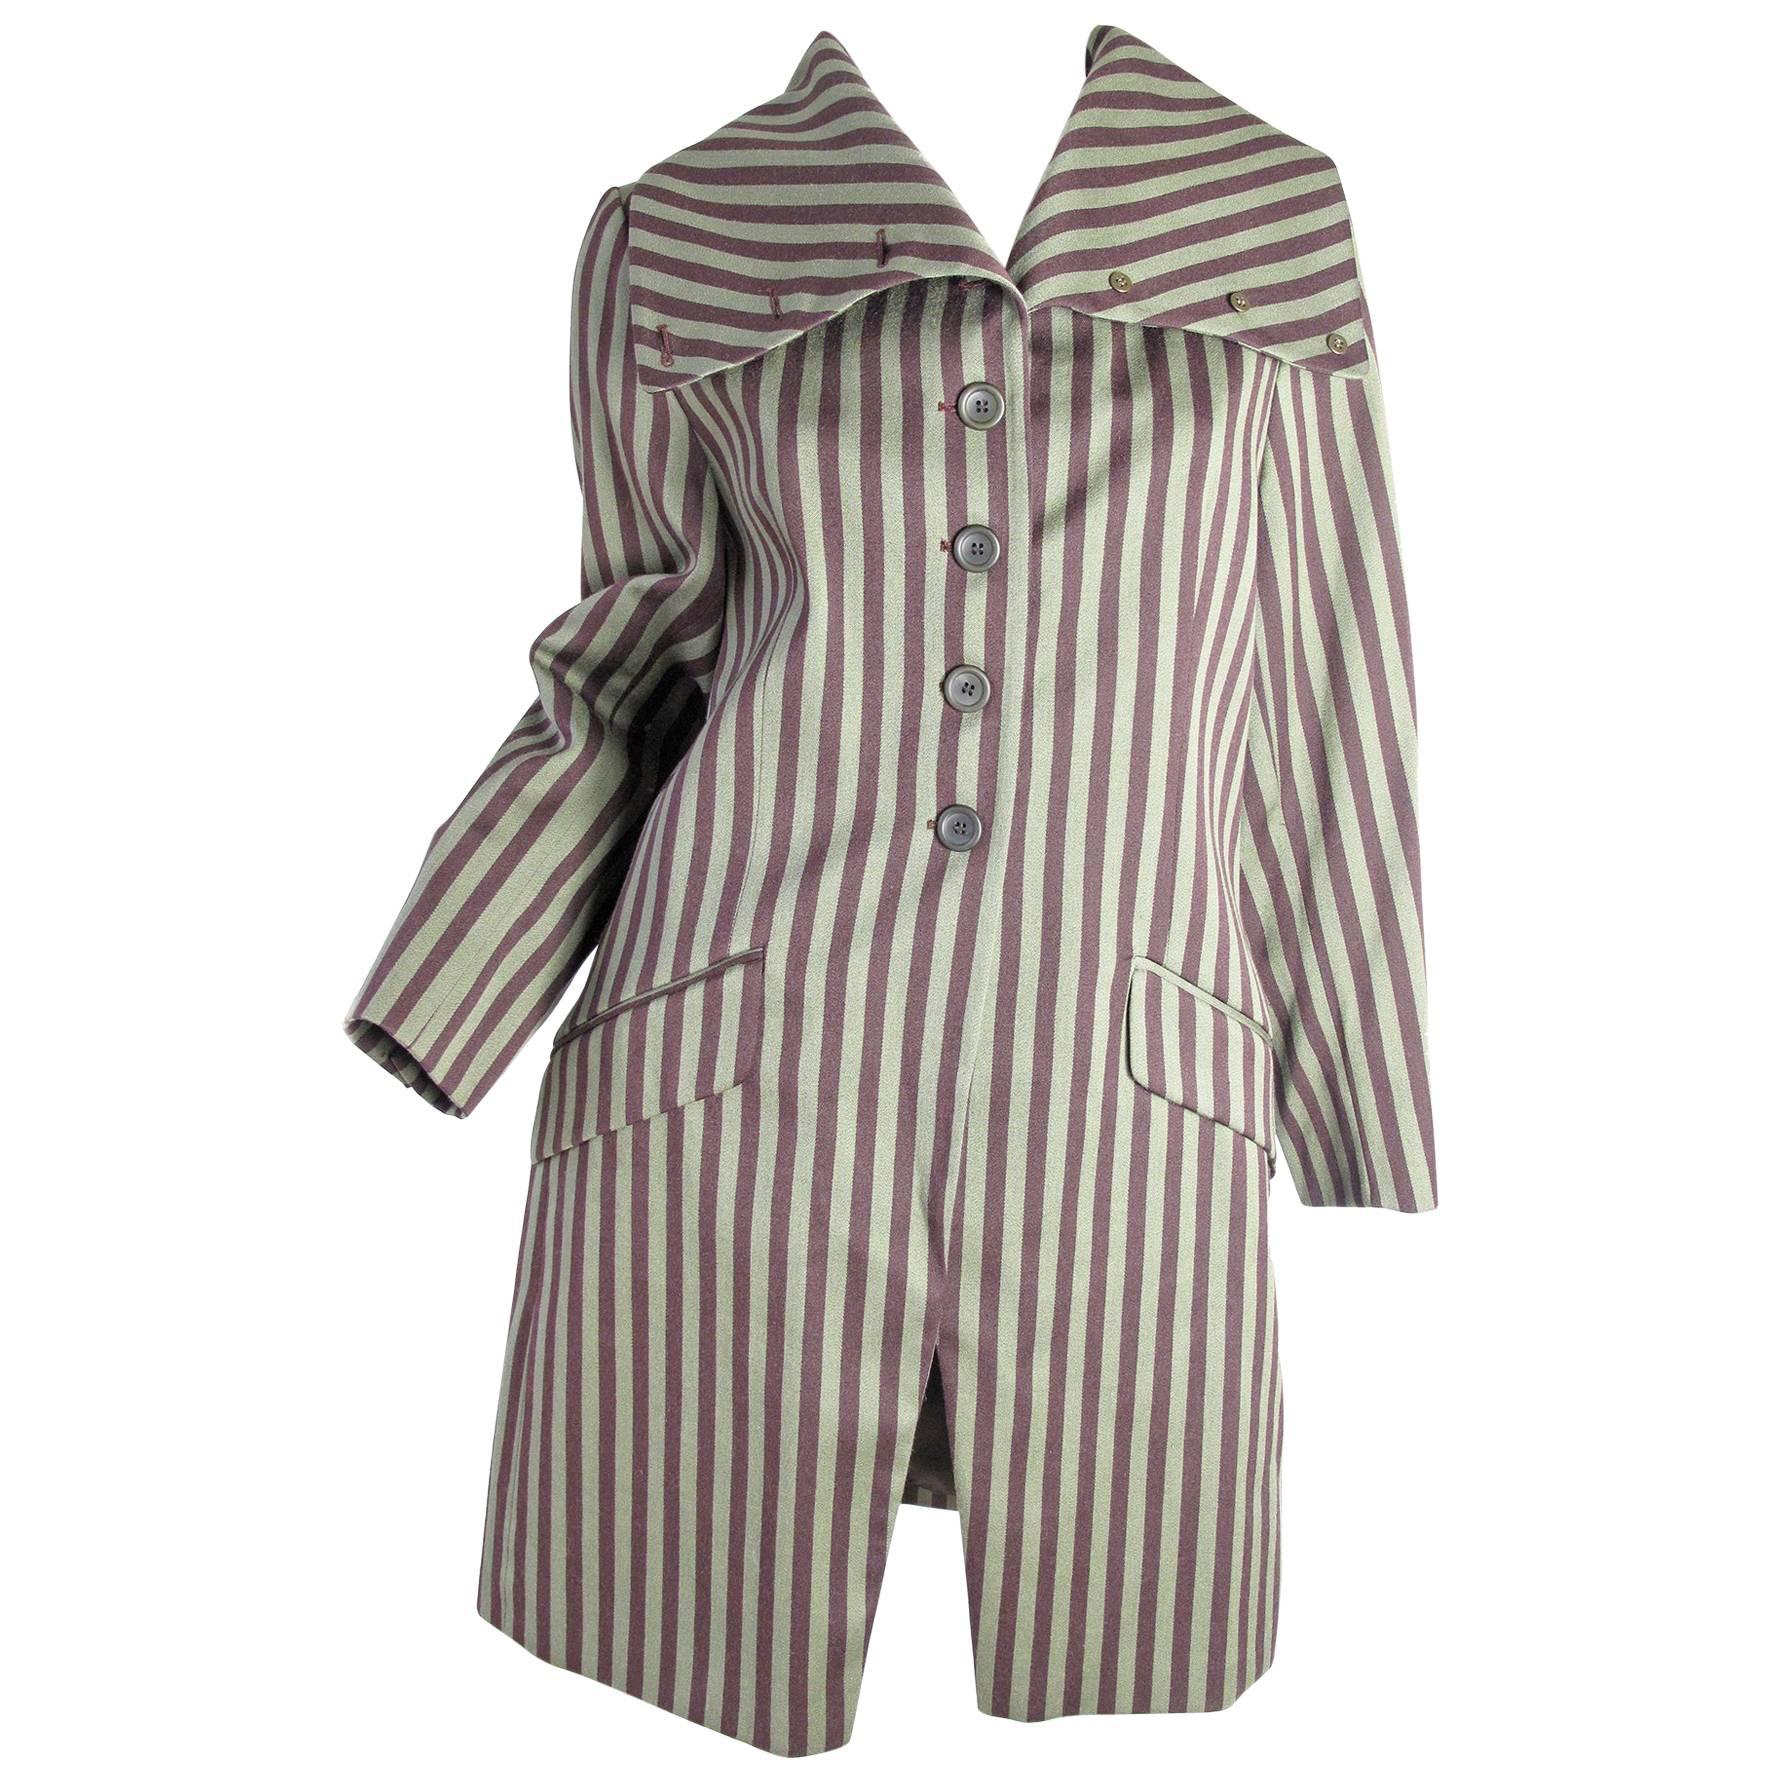 Dries Van Noten Early Striped Jacket with extra large Collar - sale